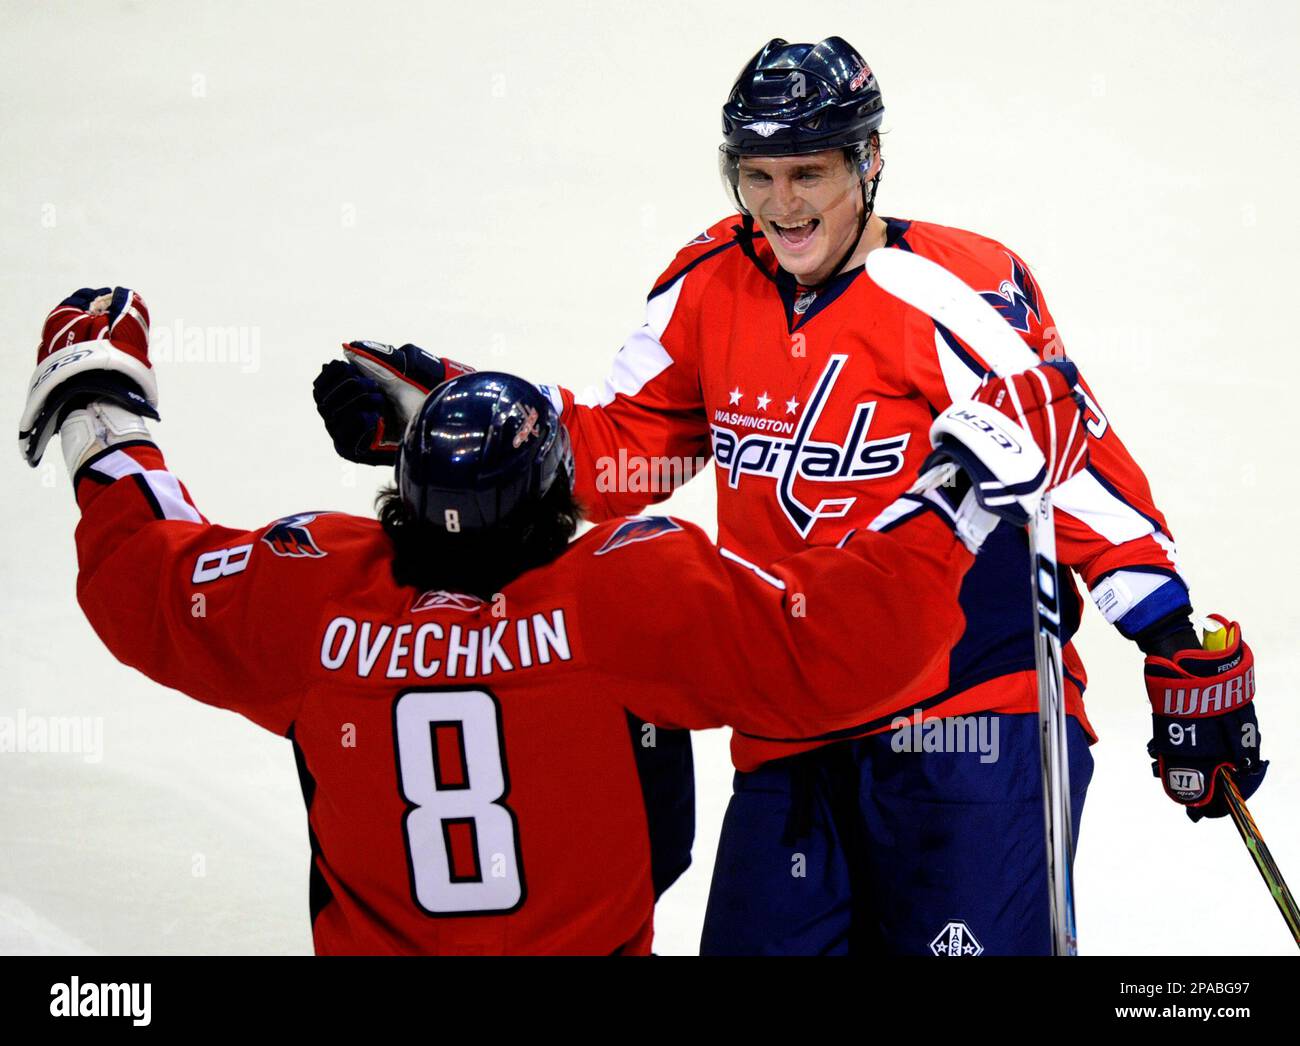 Washington Capitals Alexander Ovechkin, of Russia, is congratulated by  teammates Sergei Fedorov (91) and Mike Green (52) after scoring the game's  first goal against the Pittsburgh Penguins during first period action at